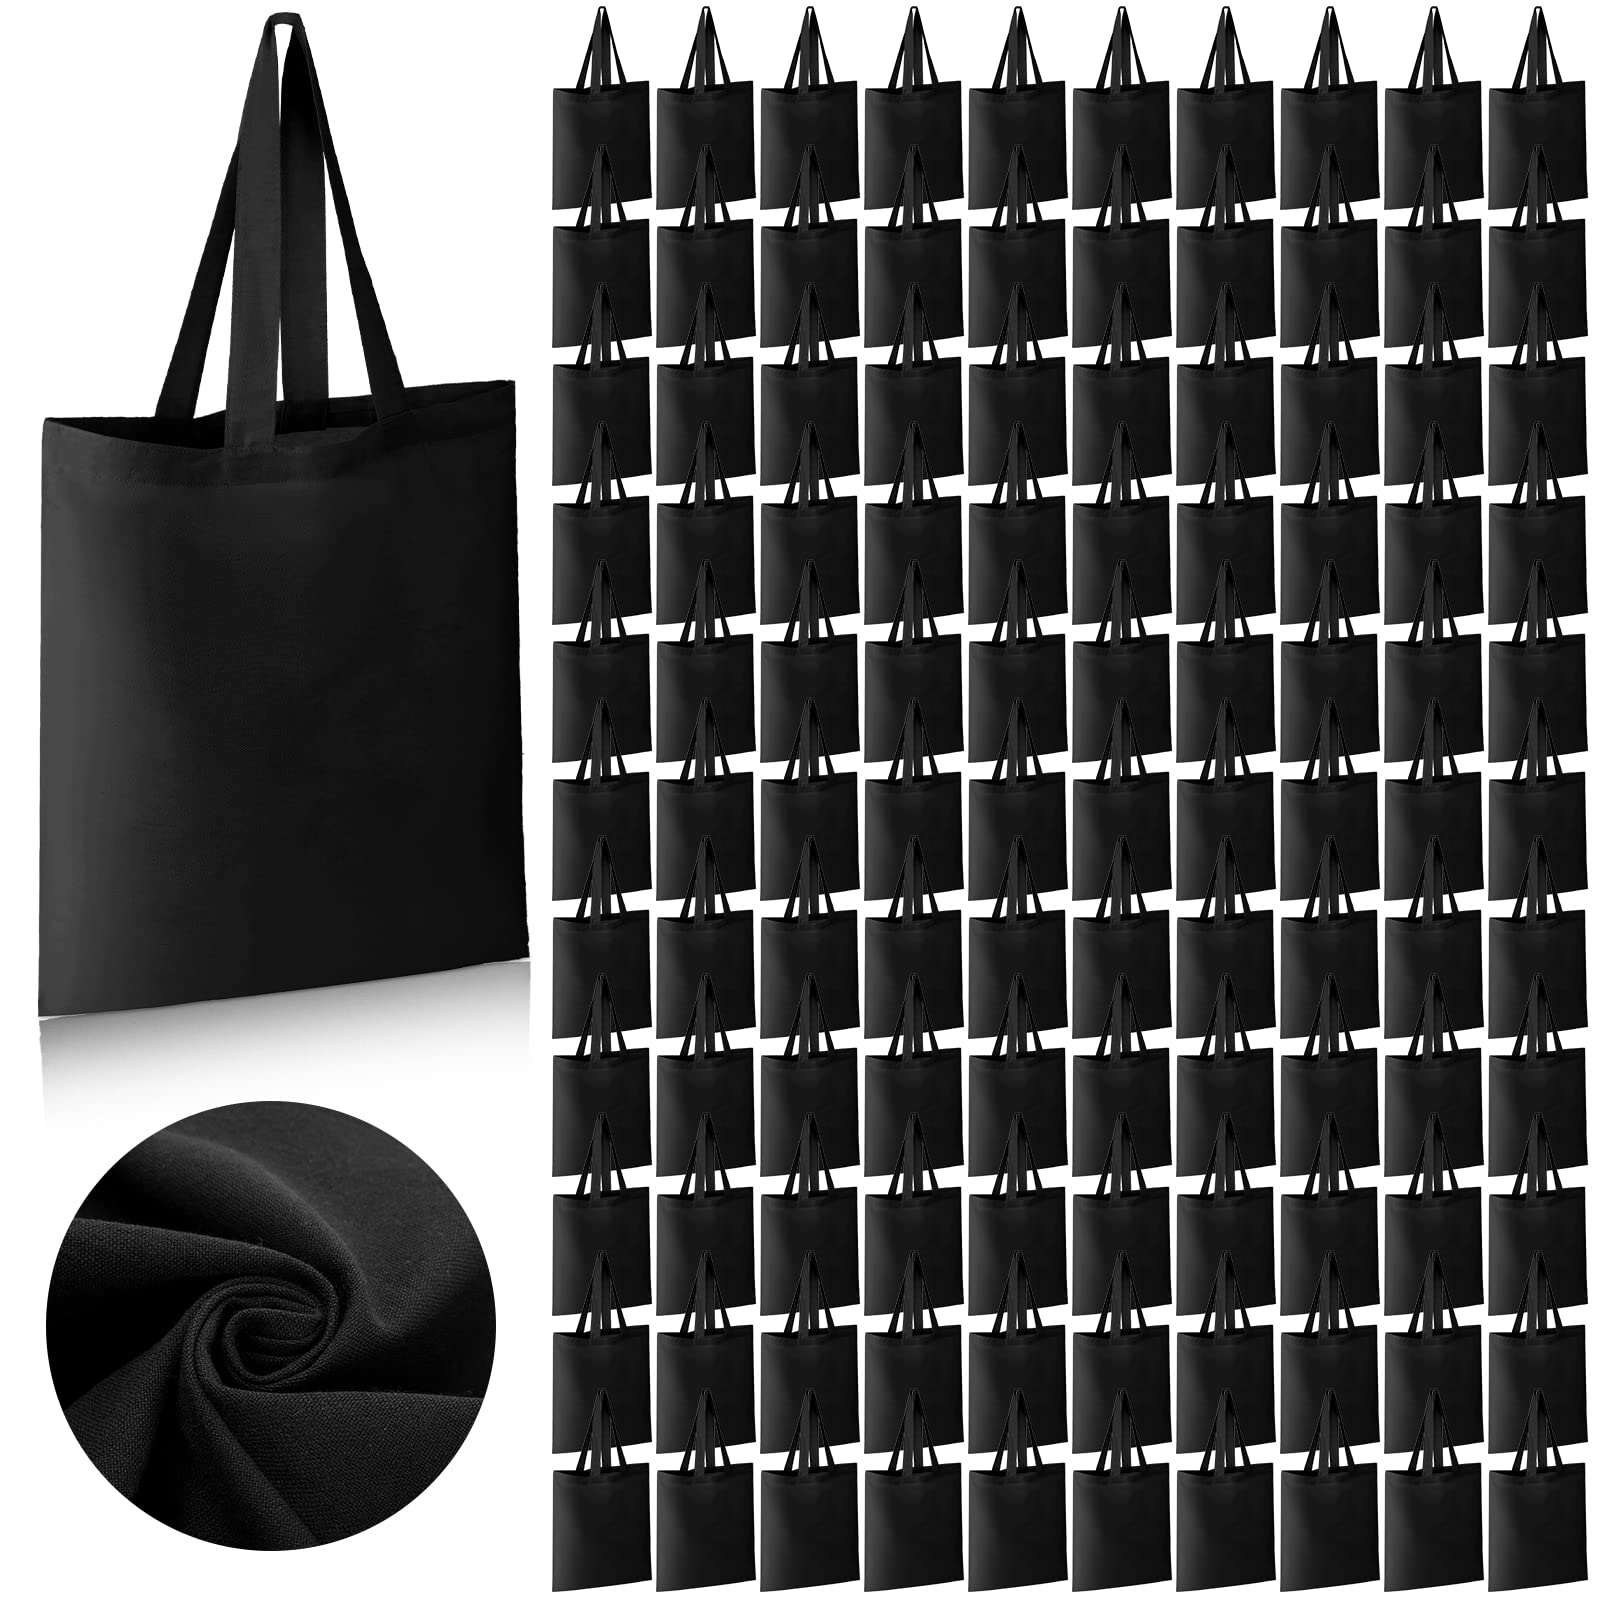 Roowest 120 Pieces Black Cotton Tote Bag Bulk 15 x 16 Inch Blank Shopping Cloth Bags Lightweight Reusable Grocery Black Tote with Long Handle for Women Men DIY Craft Gift